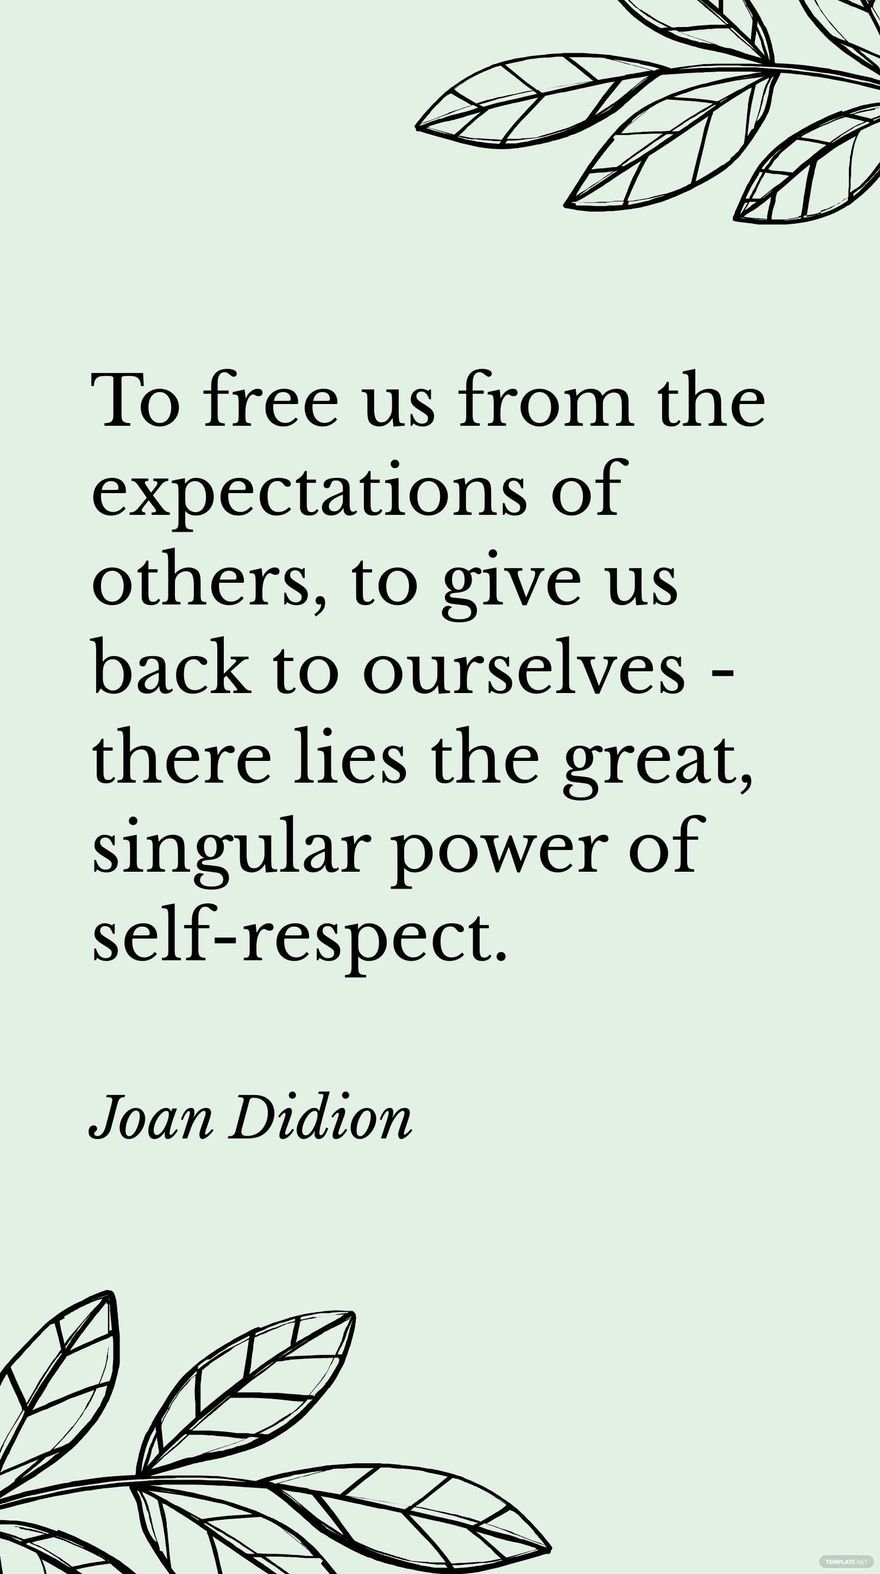 Joan Didion - To us from the expectations of others, to give us back to ourselves - there lies the great, singular power of self-respect. in JPG